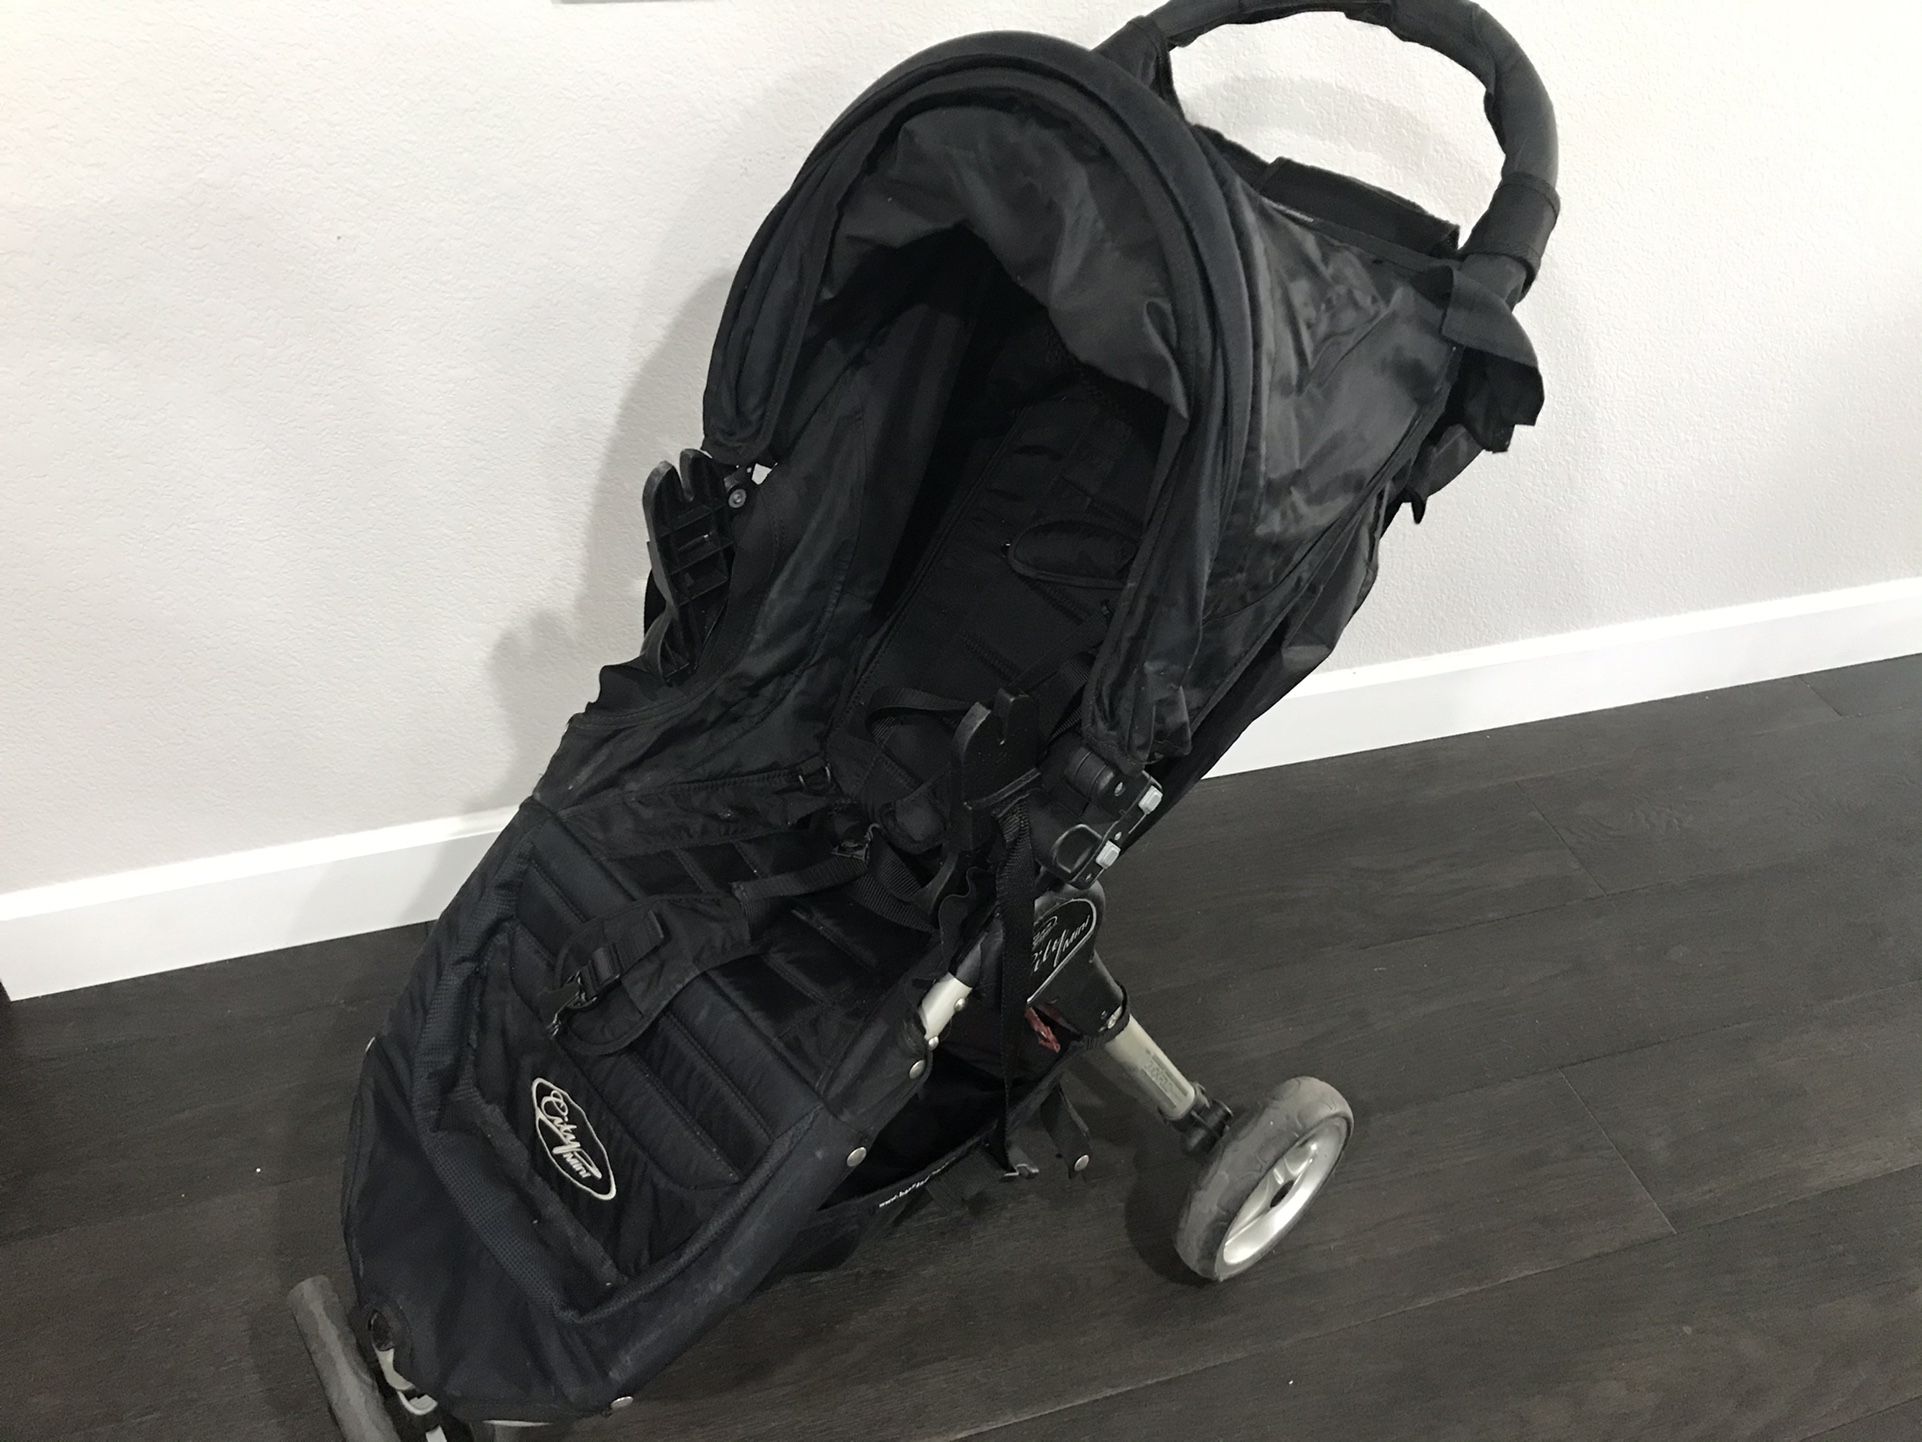 Baby Jogger City Mini Stroller with Graco Snugride adapters - $75 OBO